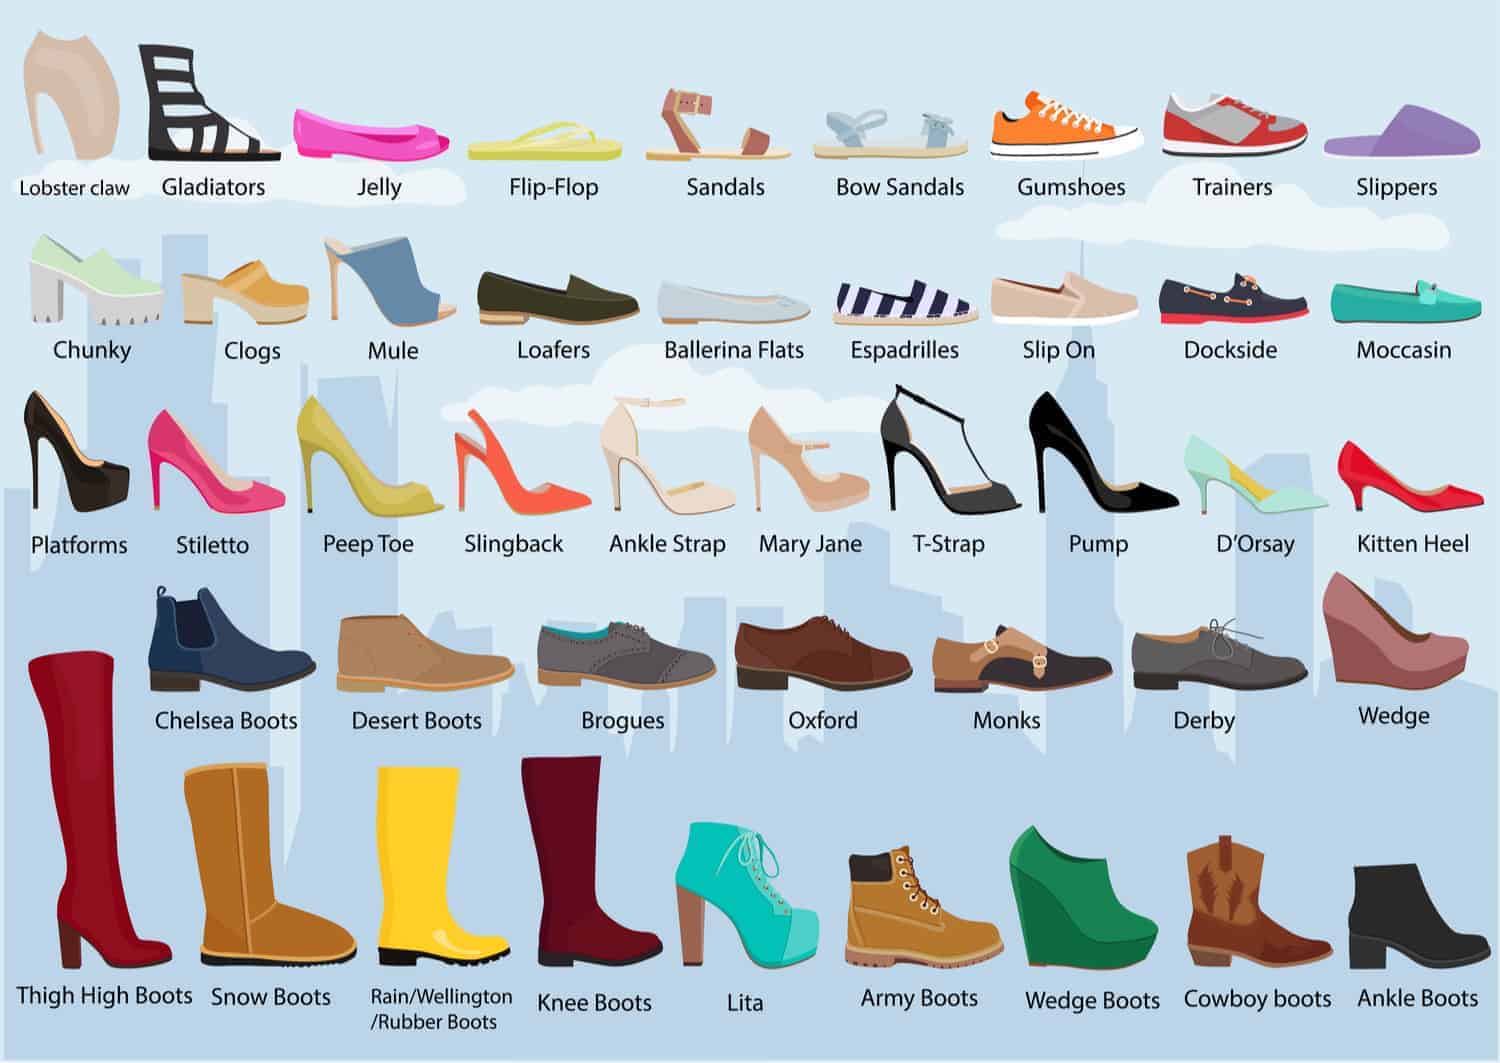 An illustrative chart depicting the different types of women's shoes.